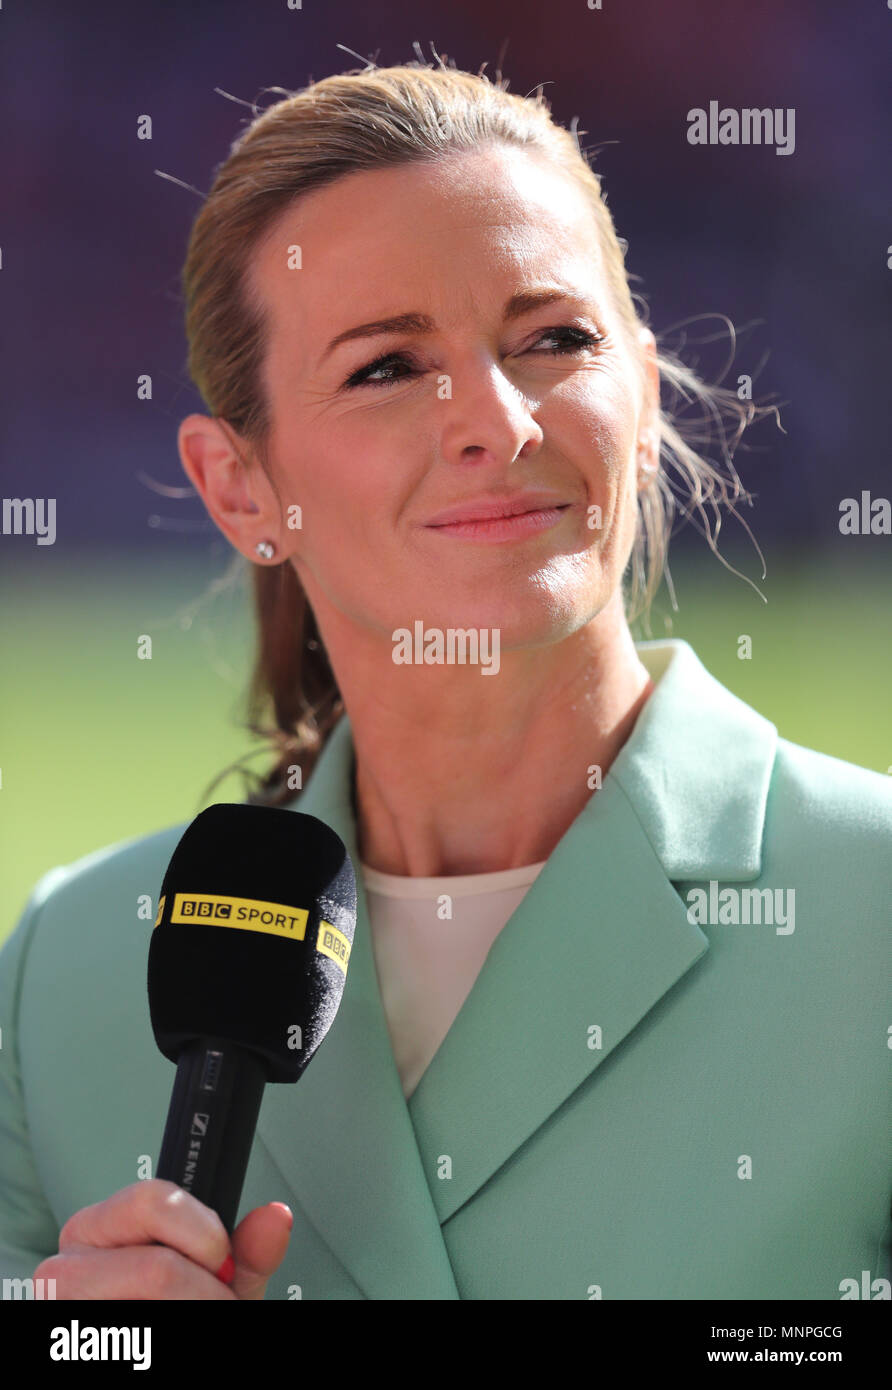 Bbc sport hi-res stock photography and images - Page 5 - Alamy